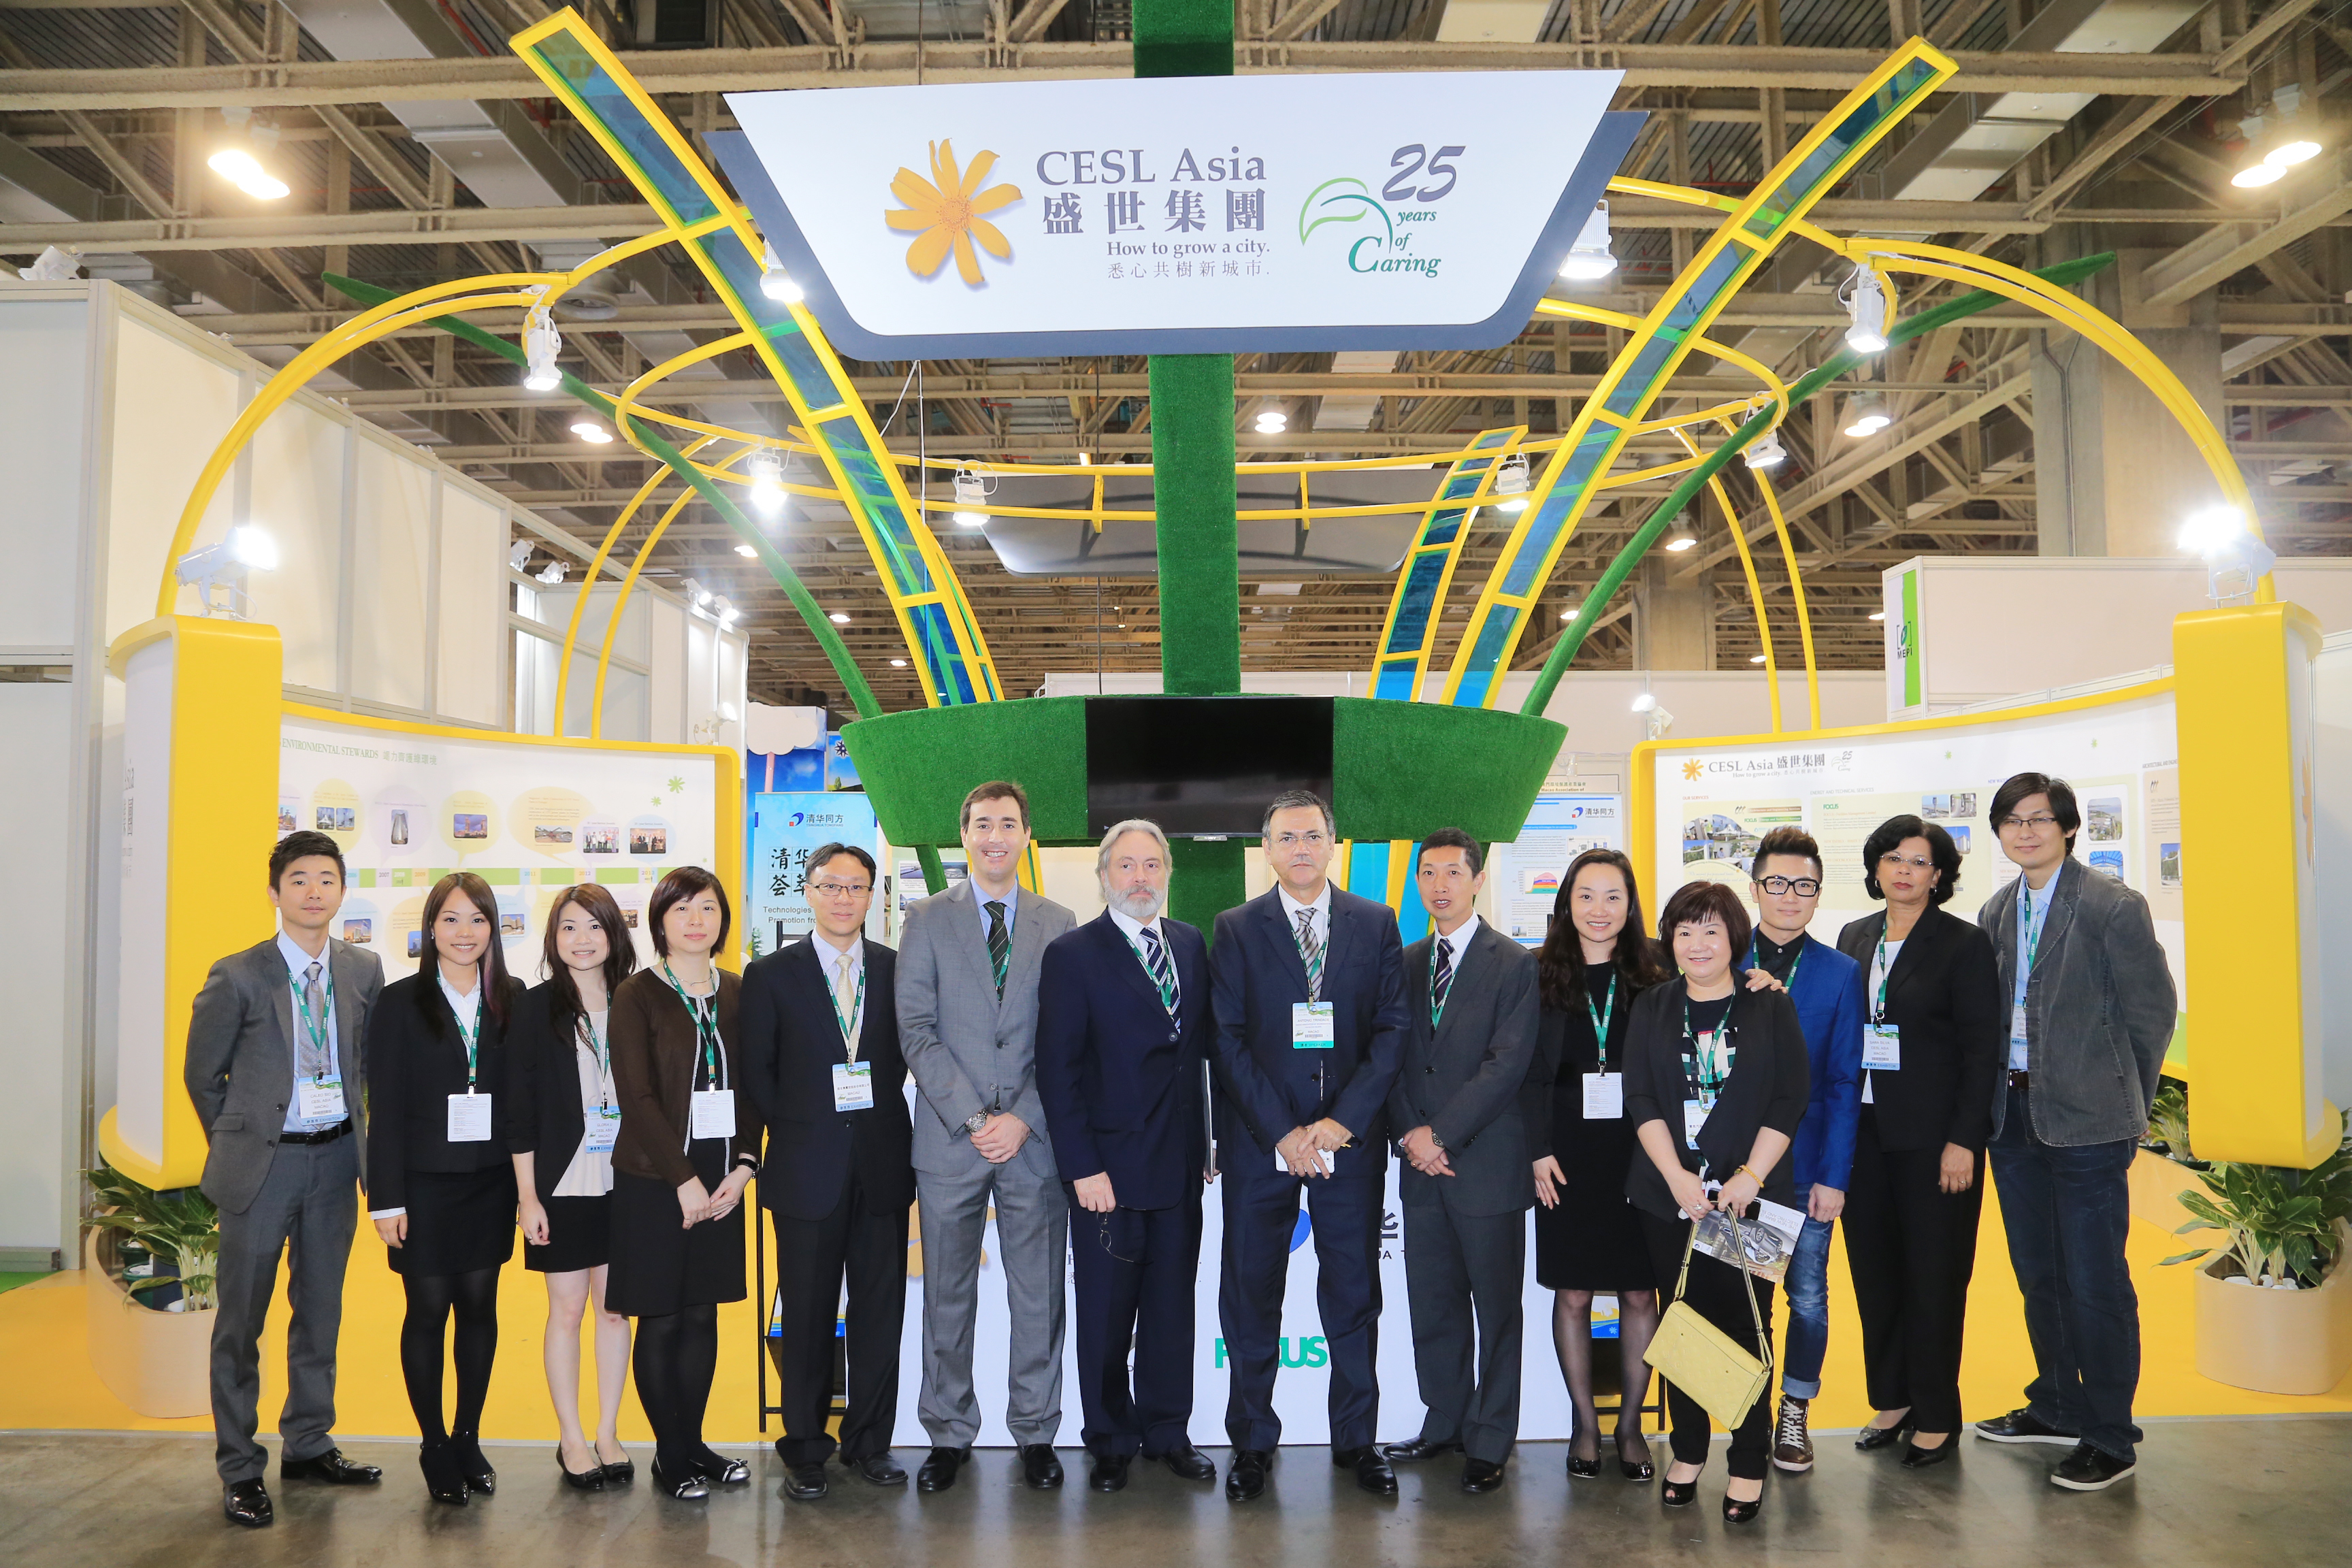 CESL Asia participated in MIECF 2014 (March 27th -29th)